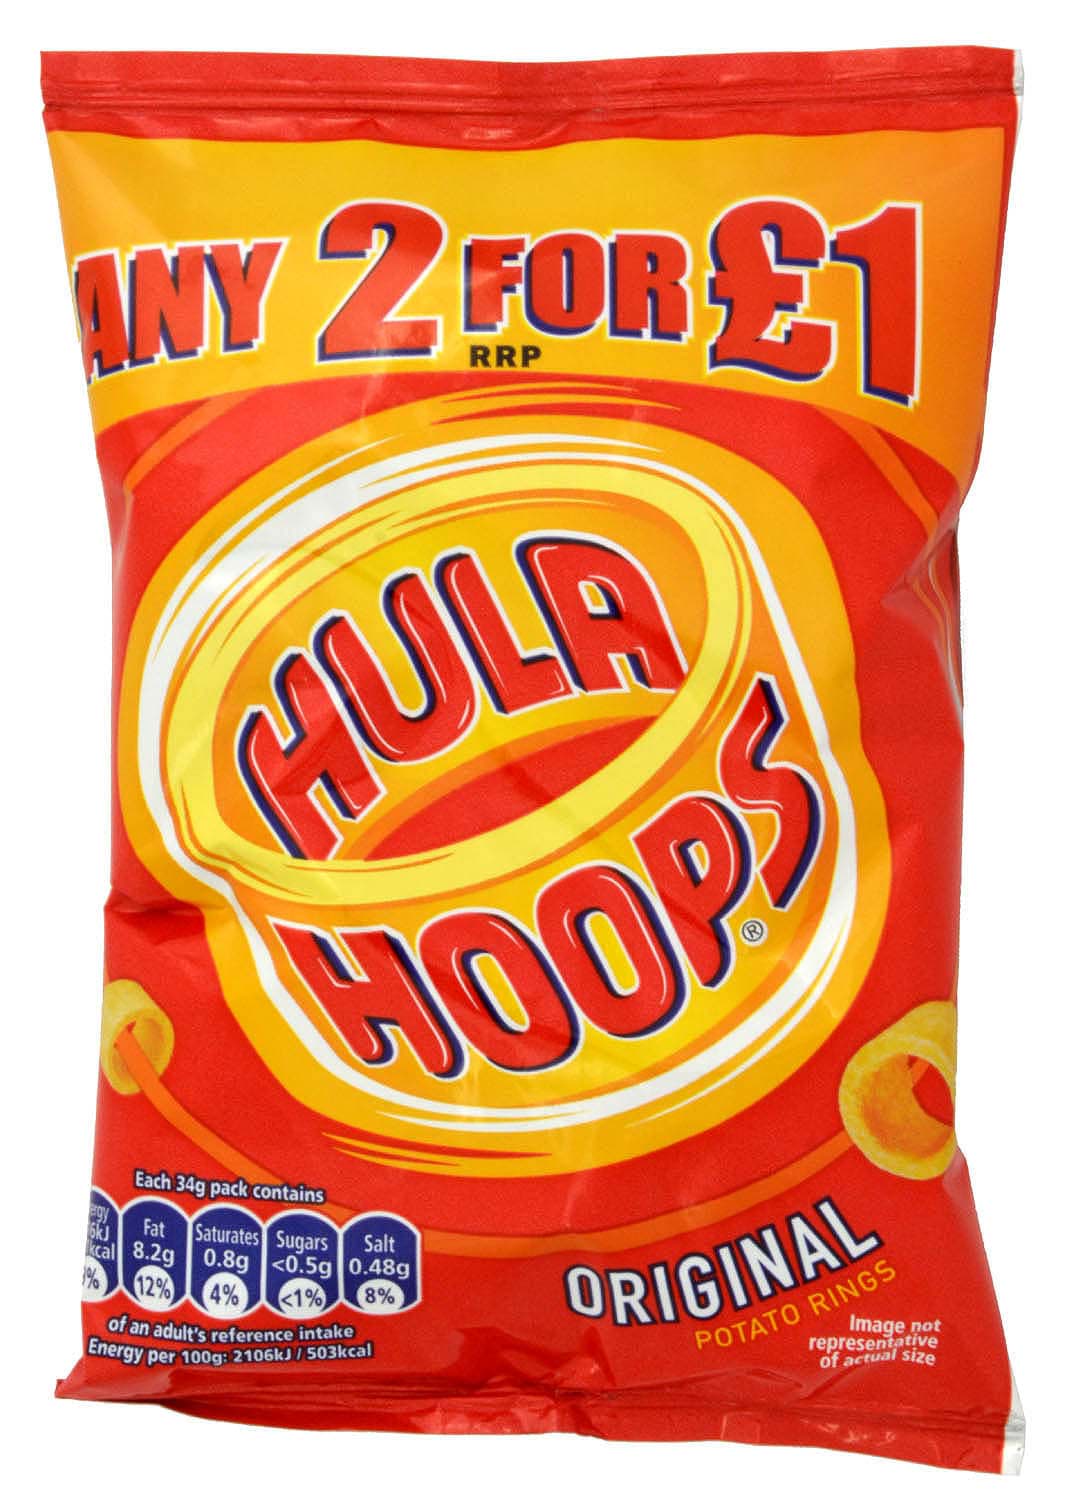 Picture of KP Hula Hoops Original 34g Potato Snack